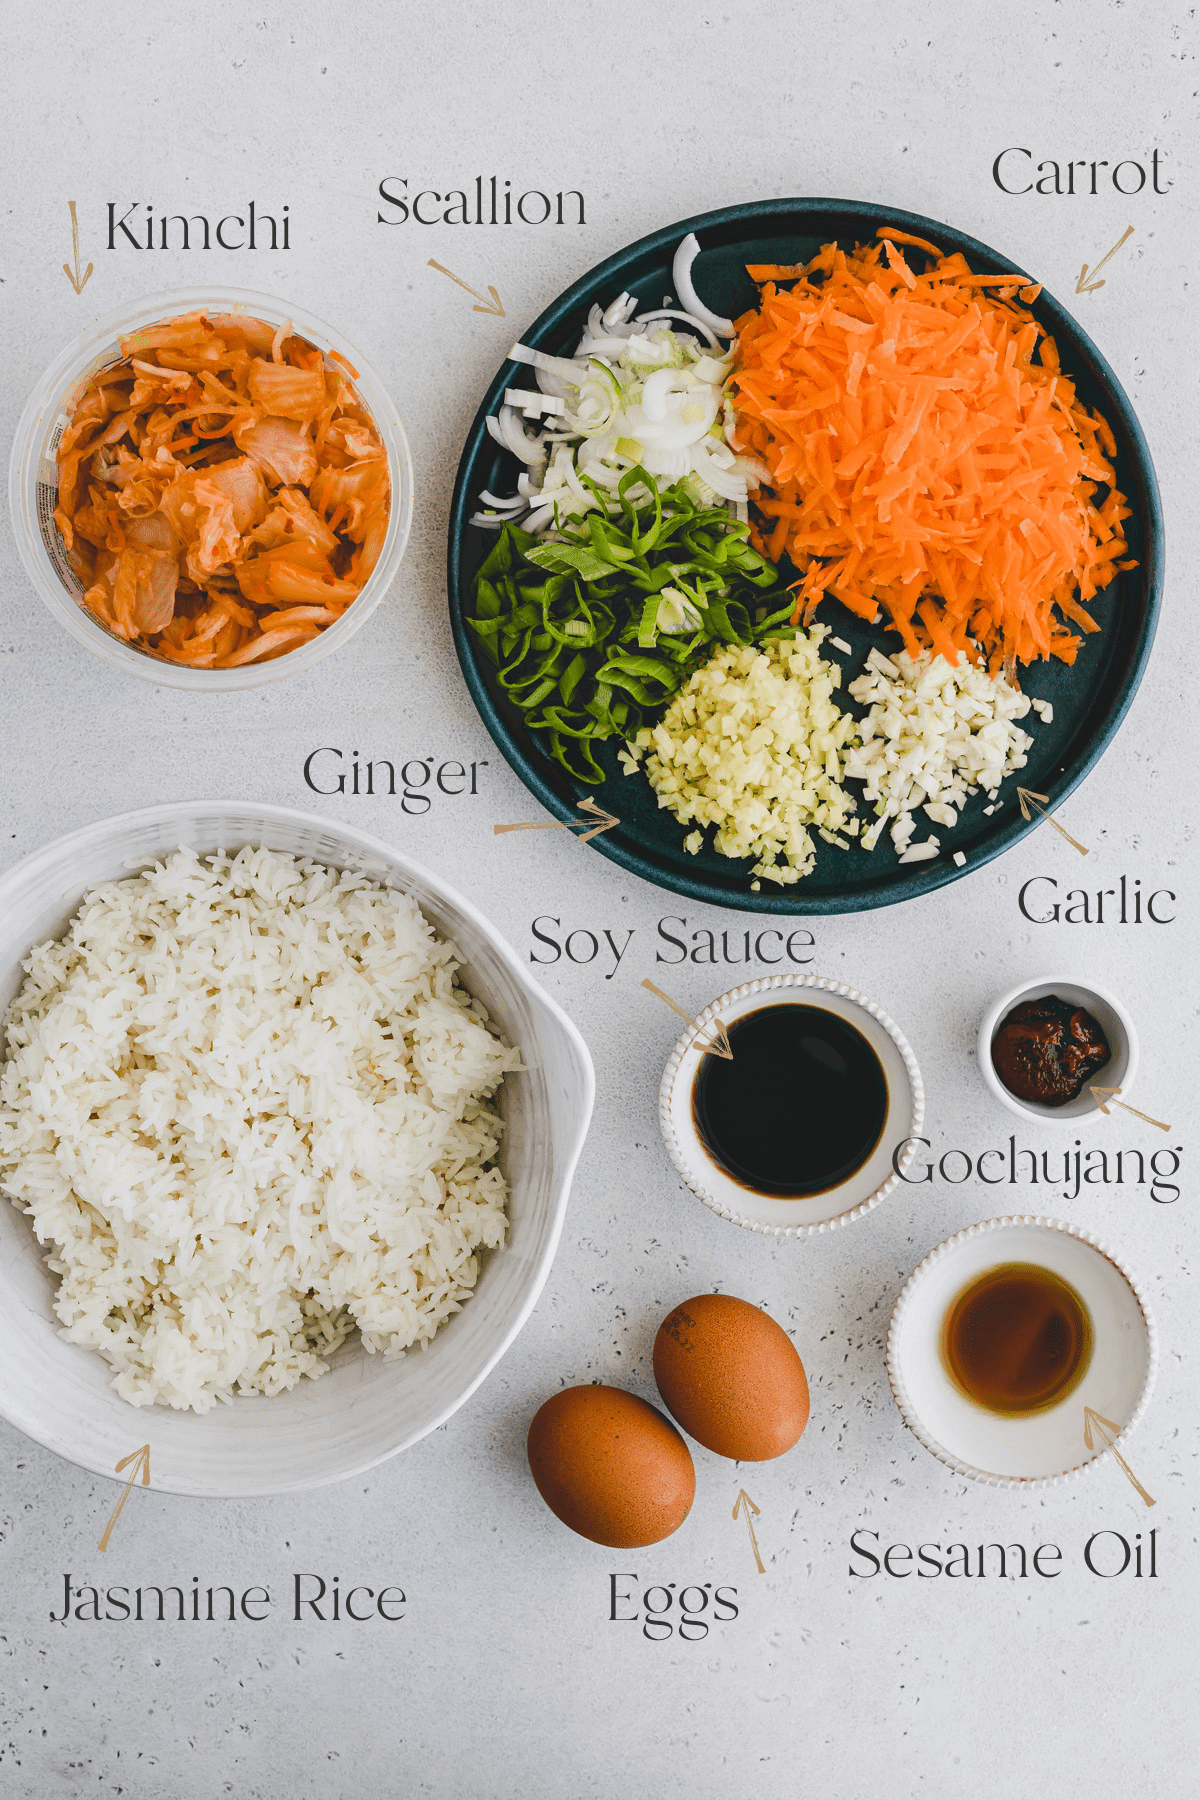 Top view of ingredients of Kimchi Fried Rice including kimchi, ginger, garlic, soy sauce, gochujang, eggs, carrots, scallions, jasmine rice and sesame oil.